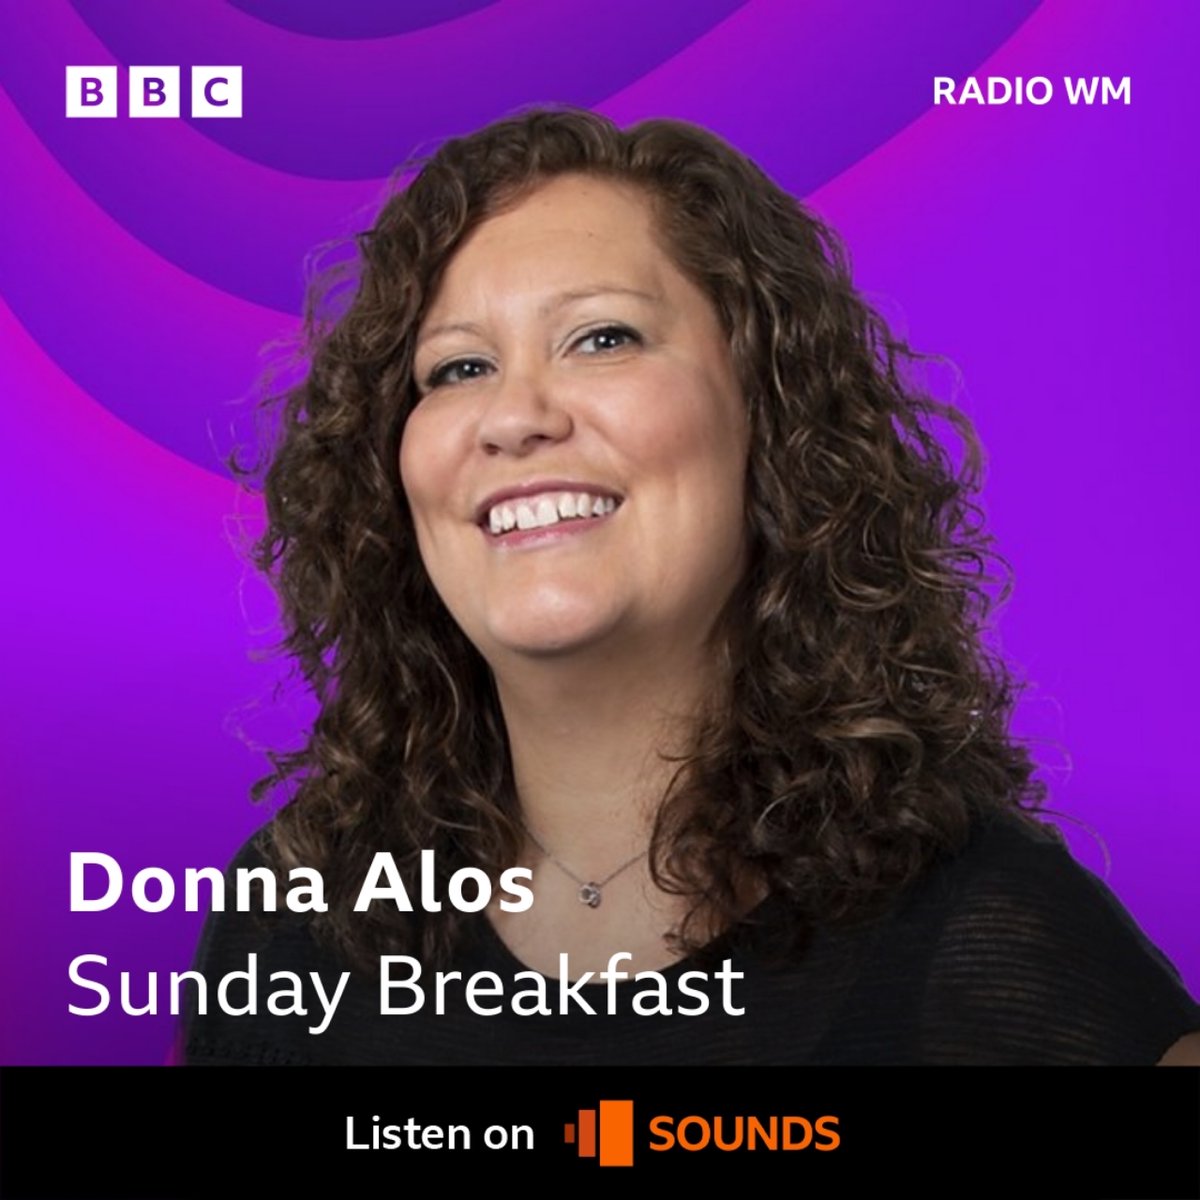 On Sunday breakfast with @DonnaAlosRadio from 6am: - A film about the story of Jesus for deaf communities - Should the church step in to reduce single use plastics? - and a church service...with a difference on a Shropshire farm! 🐑 Listen live bbc.in/3WfjkwT